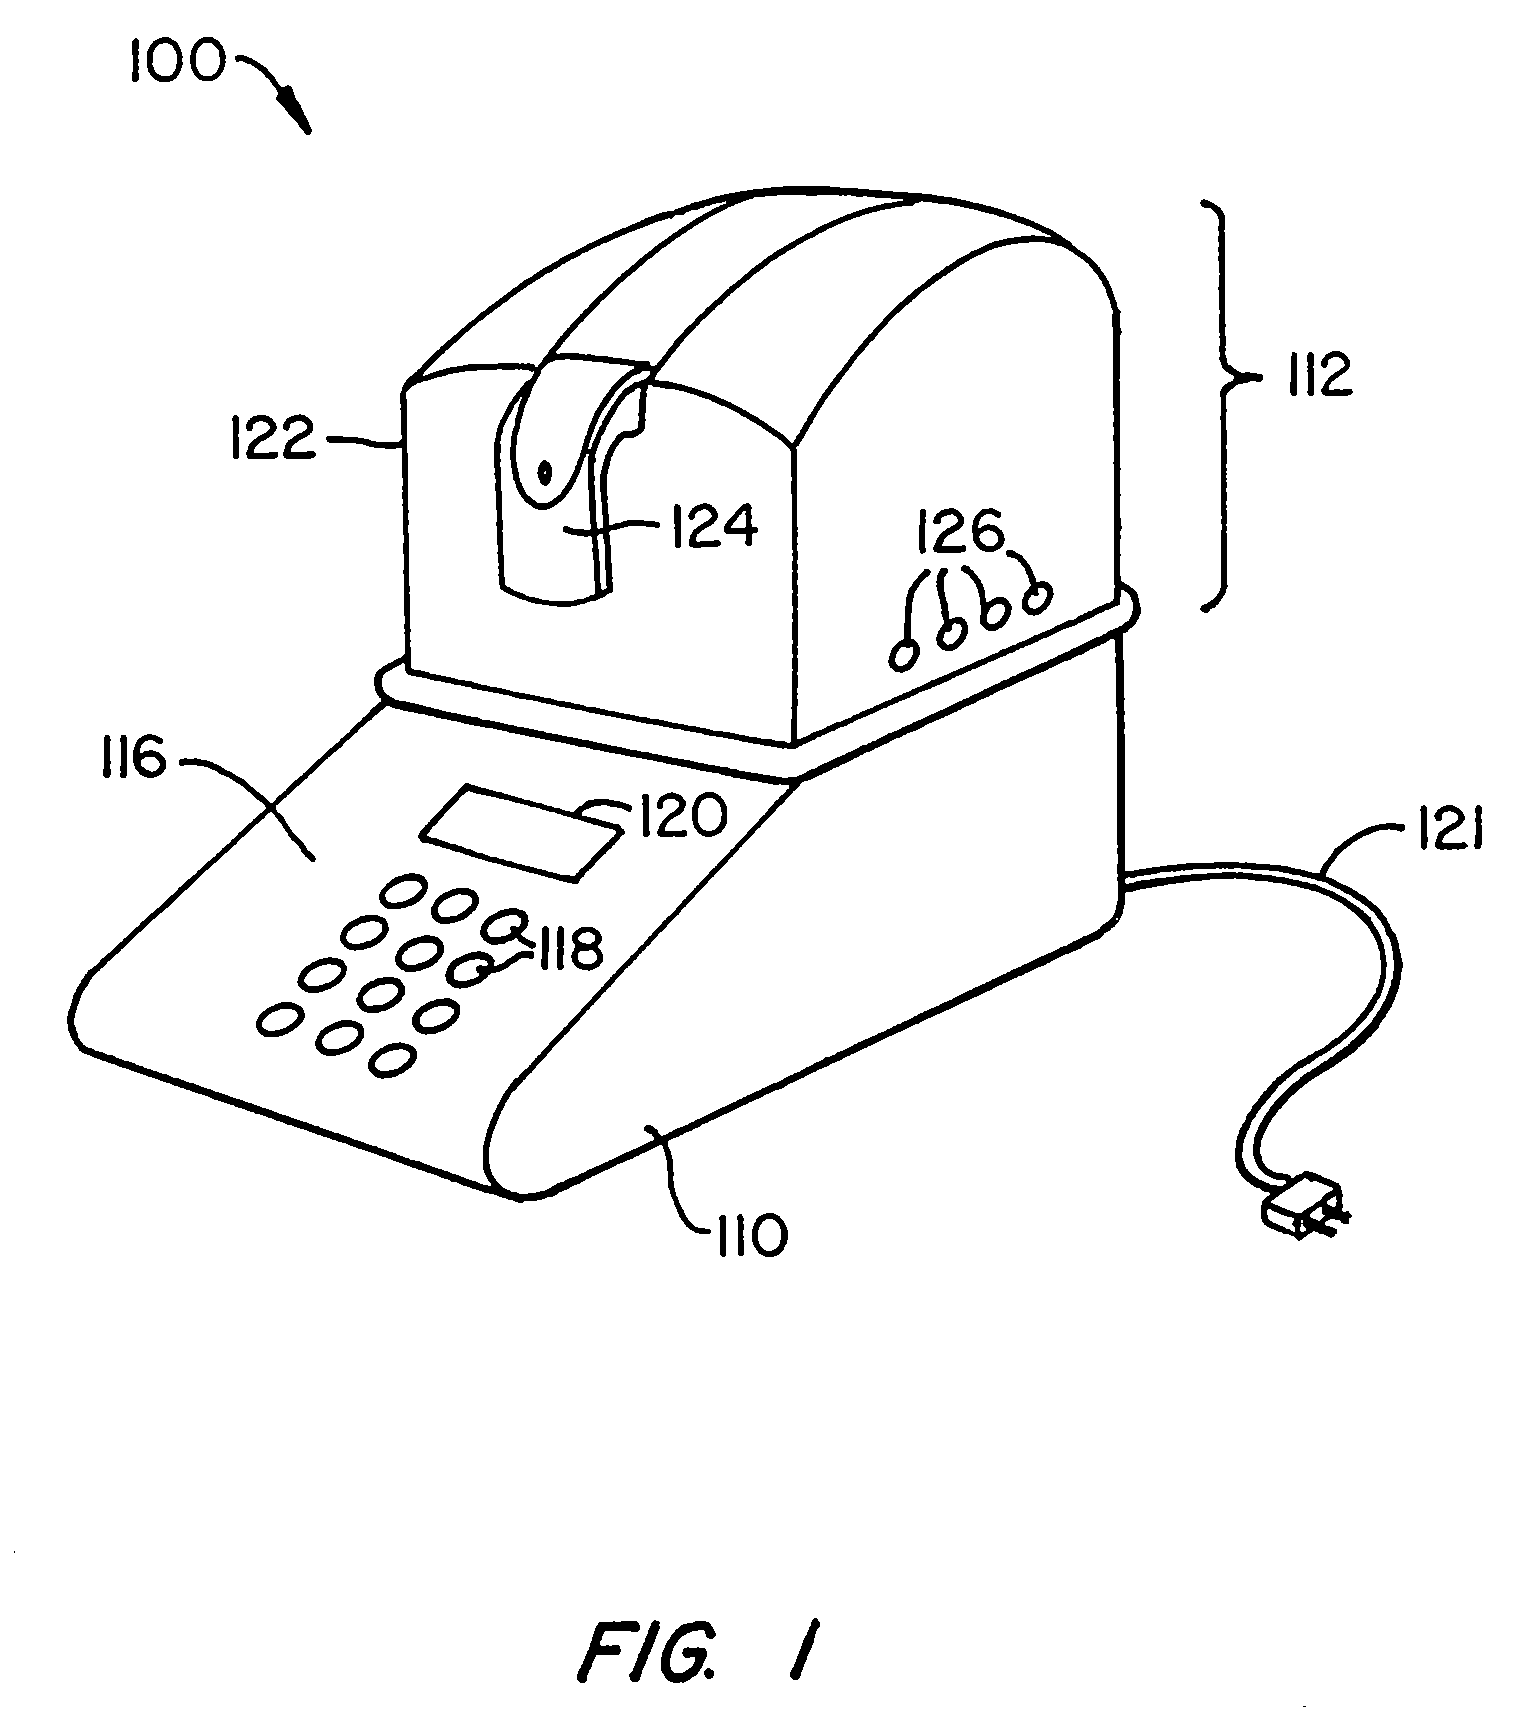 Systems and methods for fluorescence detection with a movable detection module